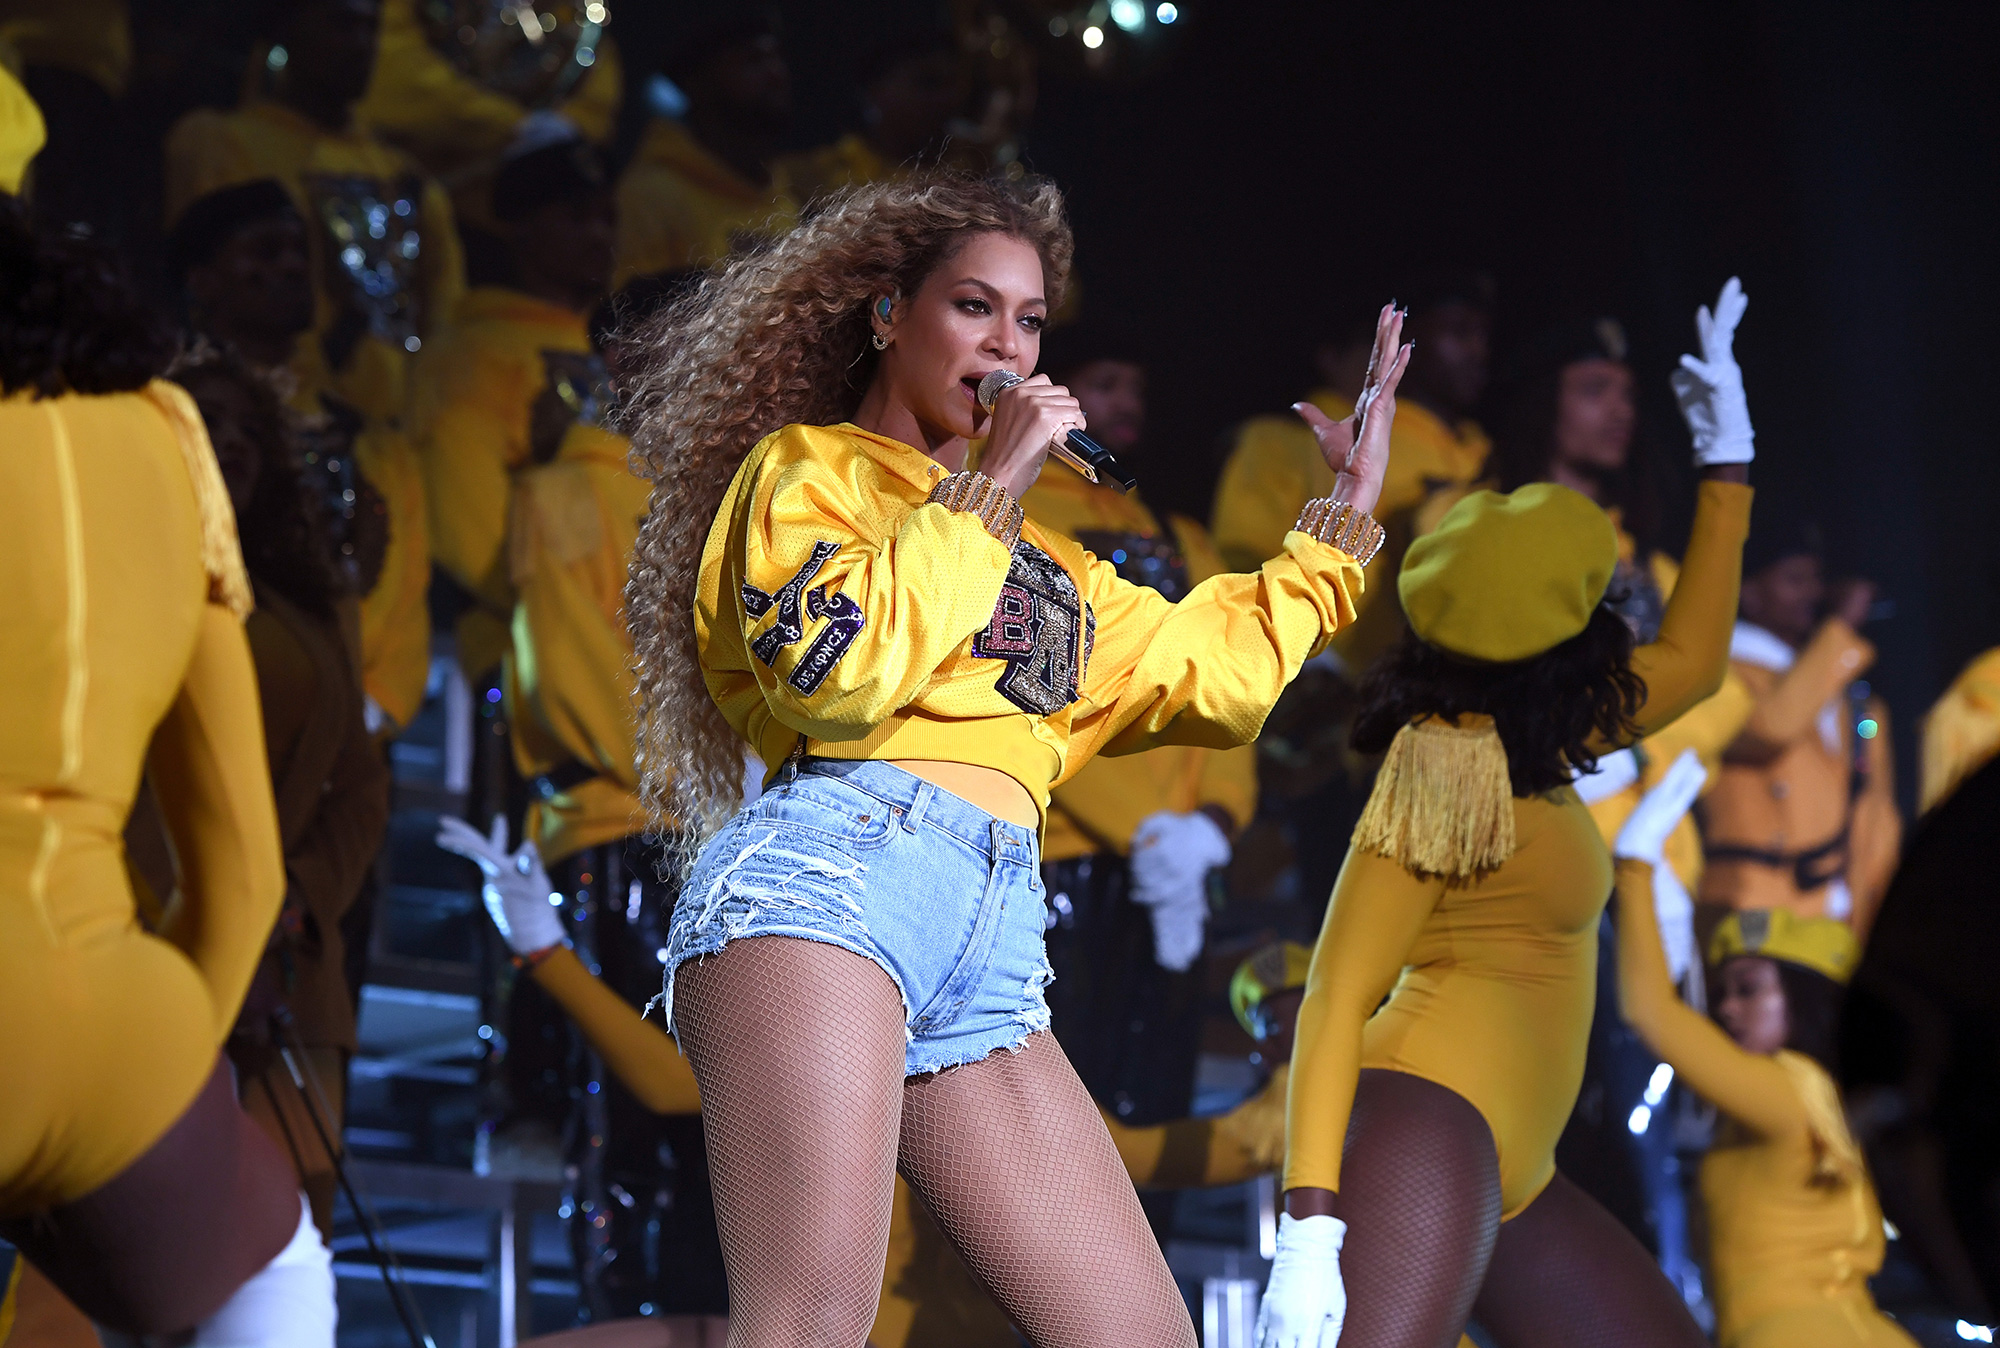 Beyonce performs onstage during the Coachella Valley Music And Arts Festival inn Indio, California, on April 14, 2018.